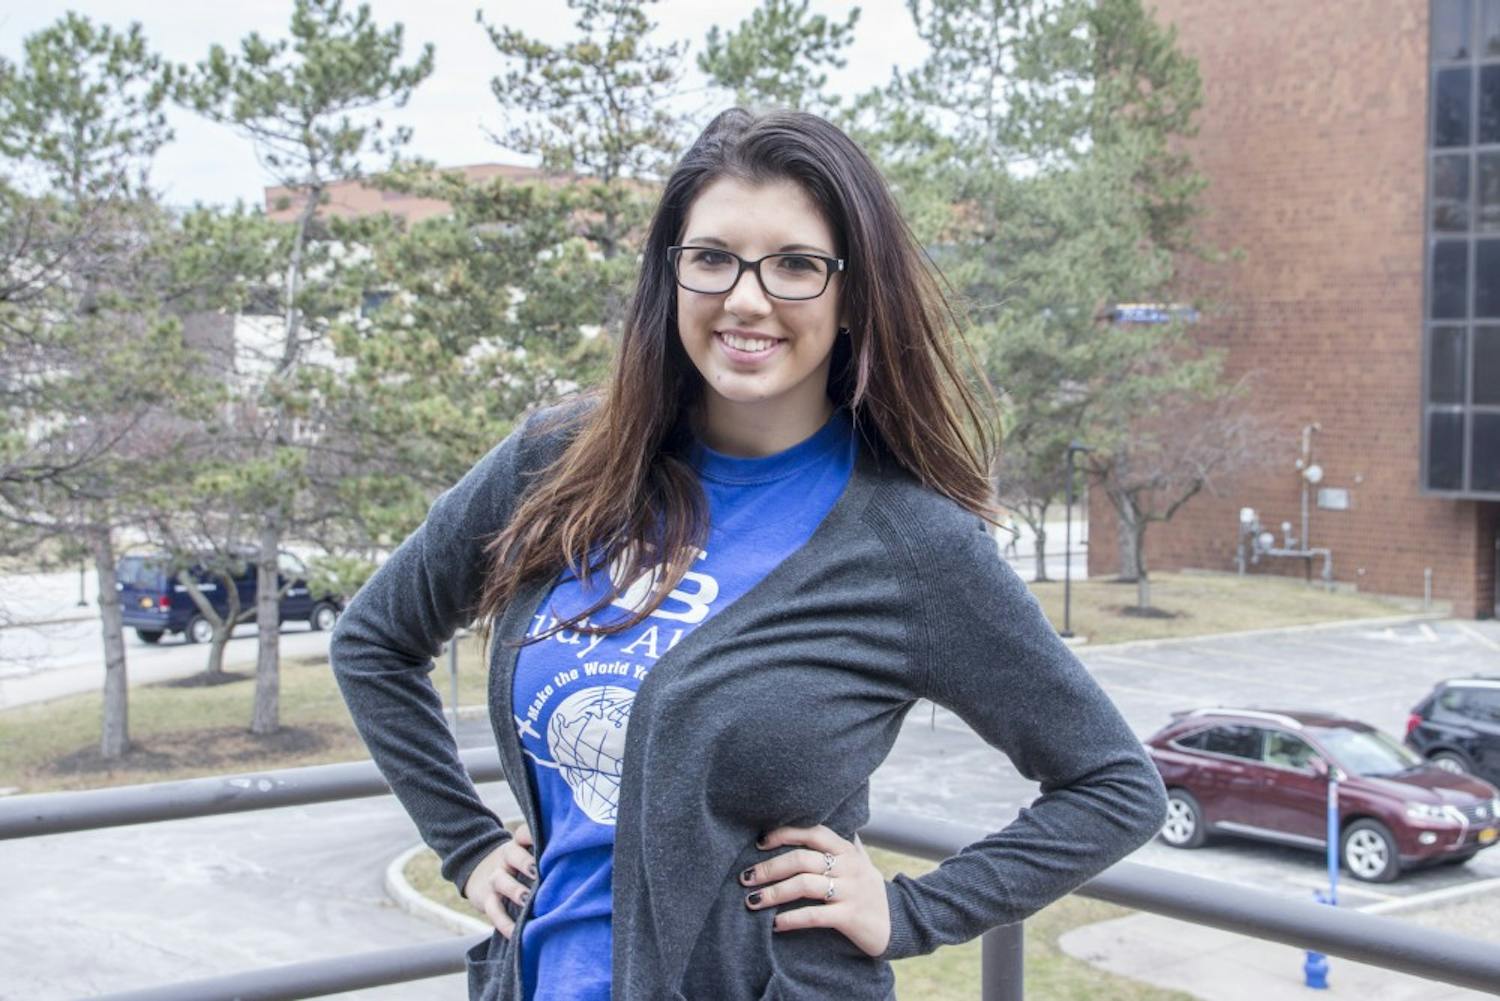 Kristie Norton (pictured)&nbsp;has been performing with The Royal Pitches, UB’s all-female a cappella group, since her freshman year. Since auditioning during the spring semester of her first year at UB, Norton has continued her passion of music through performing with the group.